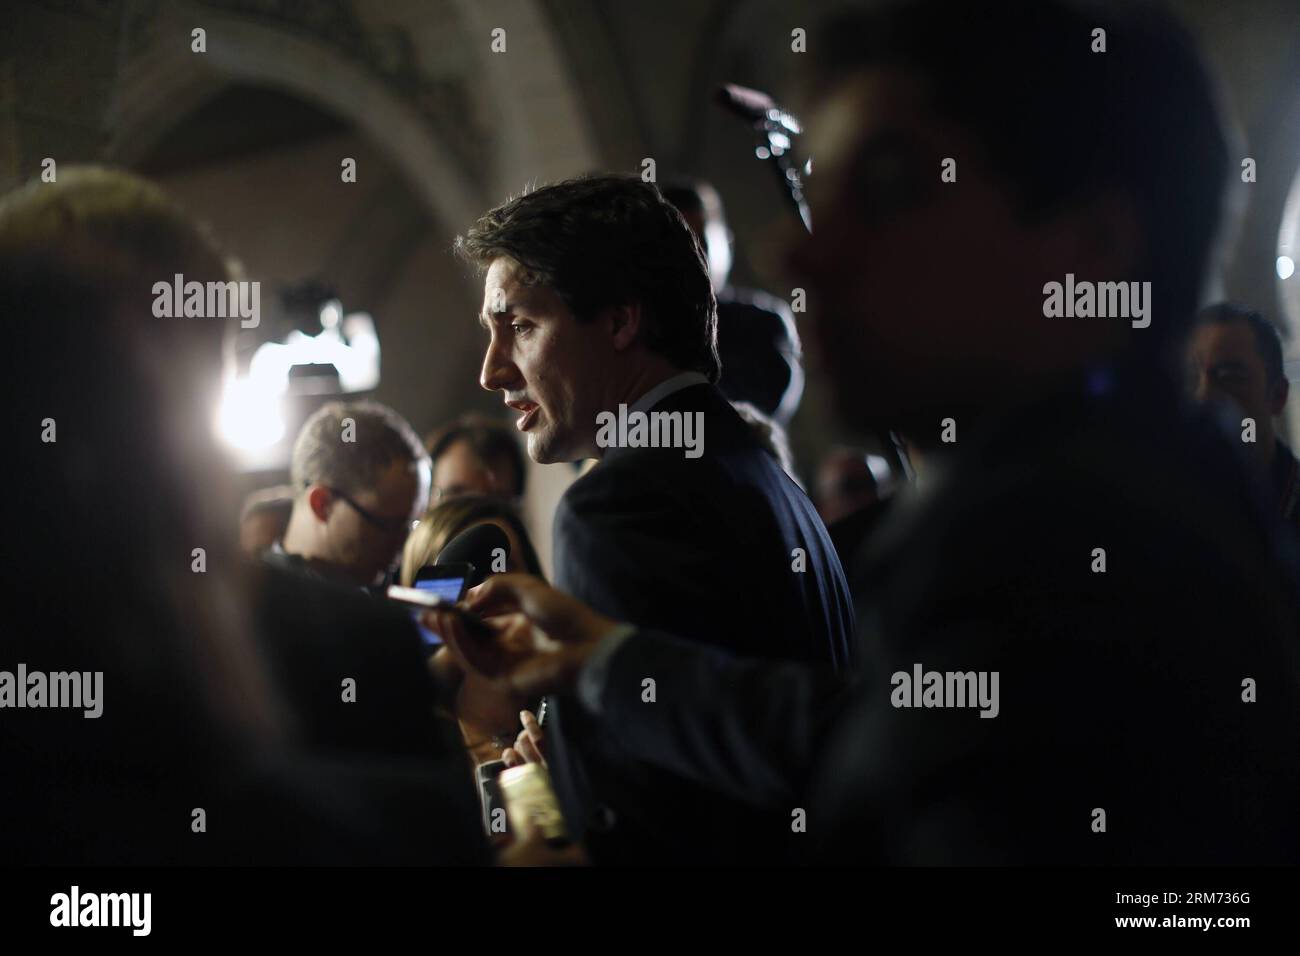 (140212) -- OTTAWA, (Xinhua) -- Liberal Party leader Justin Tudeau speaks to reporters about the new federal budget, unveiled by Finance Minister Jim Flaherty at Parliament Hill in Ottawa, Canada, Feb. 11, 2014. Jim Flaherty on Tuesday unveiled a federal budget projecting a surplus in 2015. (Xinhua/David Kawai) CANADA-OTTAWA-BUDGET PUBLICATIONxNOTxINxCHN   Ottawa XINHUA Liberal Party Leader Justin  Speaks to Reporters About The New Federal Budget unveiled by Finance Ministers Jim Flaherty AT Parliament Hill in Ottawa Canada Feb 11 2014 Jim Flaherty ON Tuesday unveiled a Federal Budget projecti Stock Photo